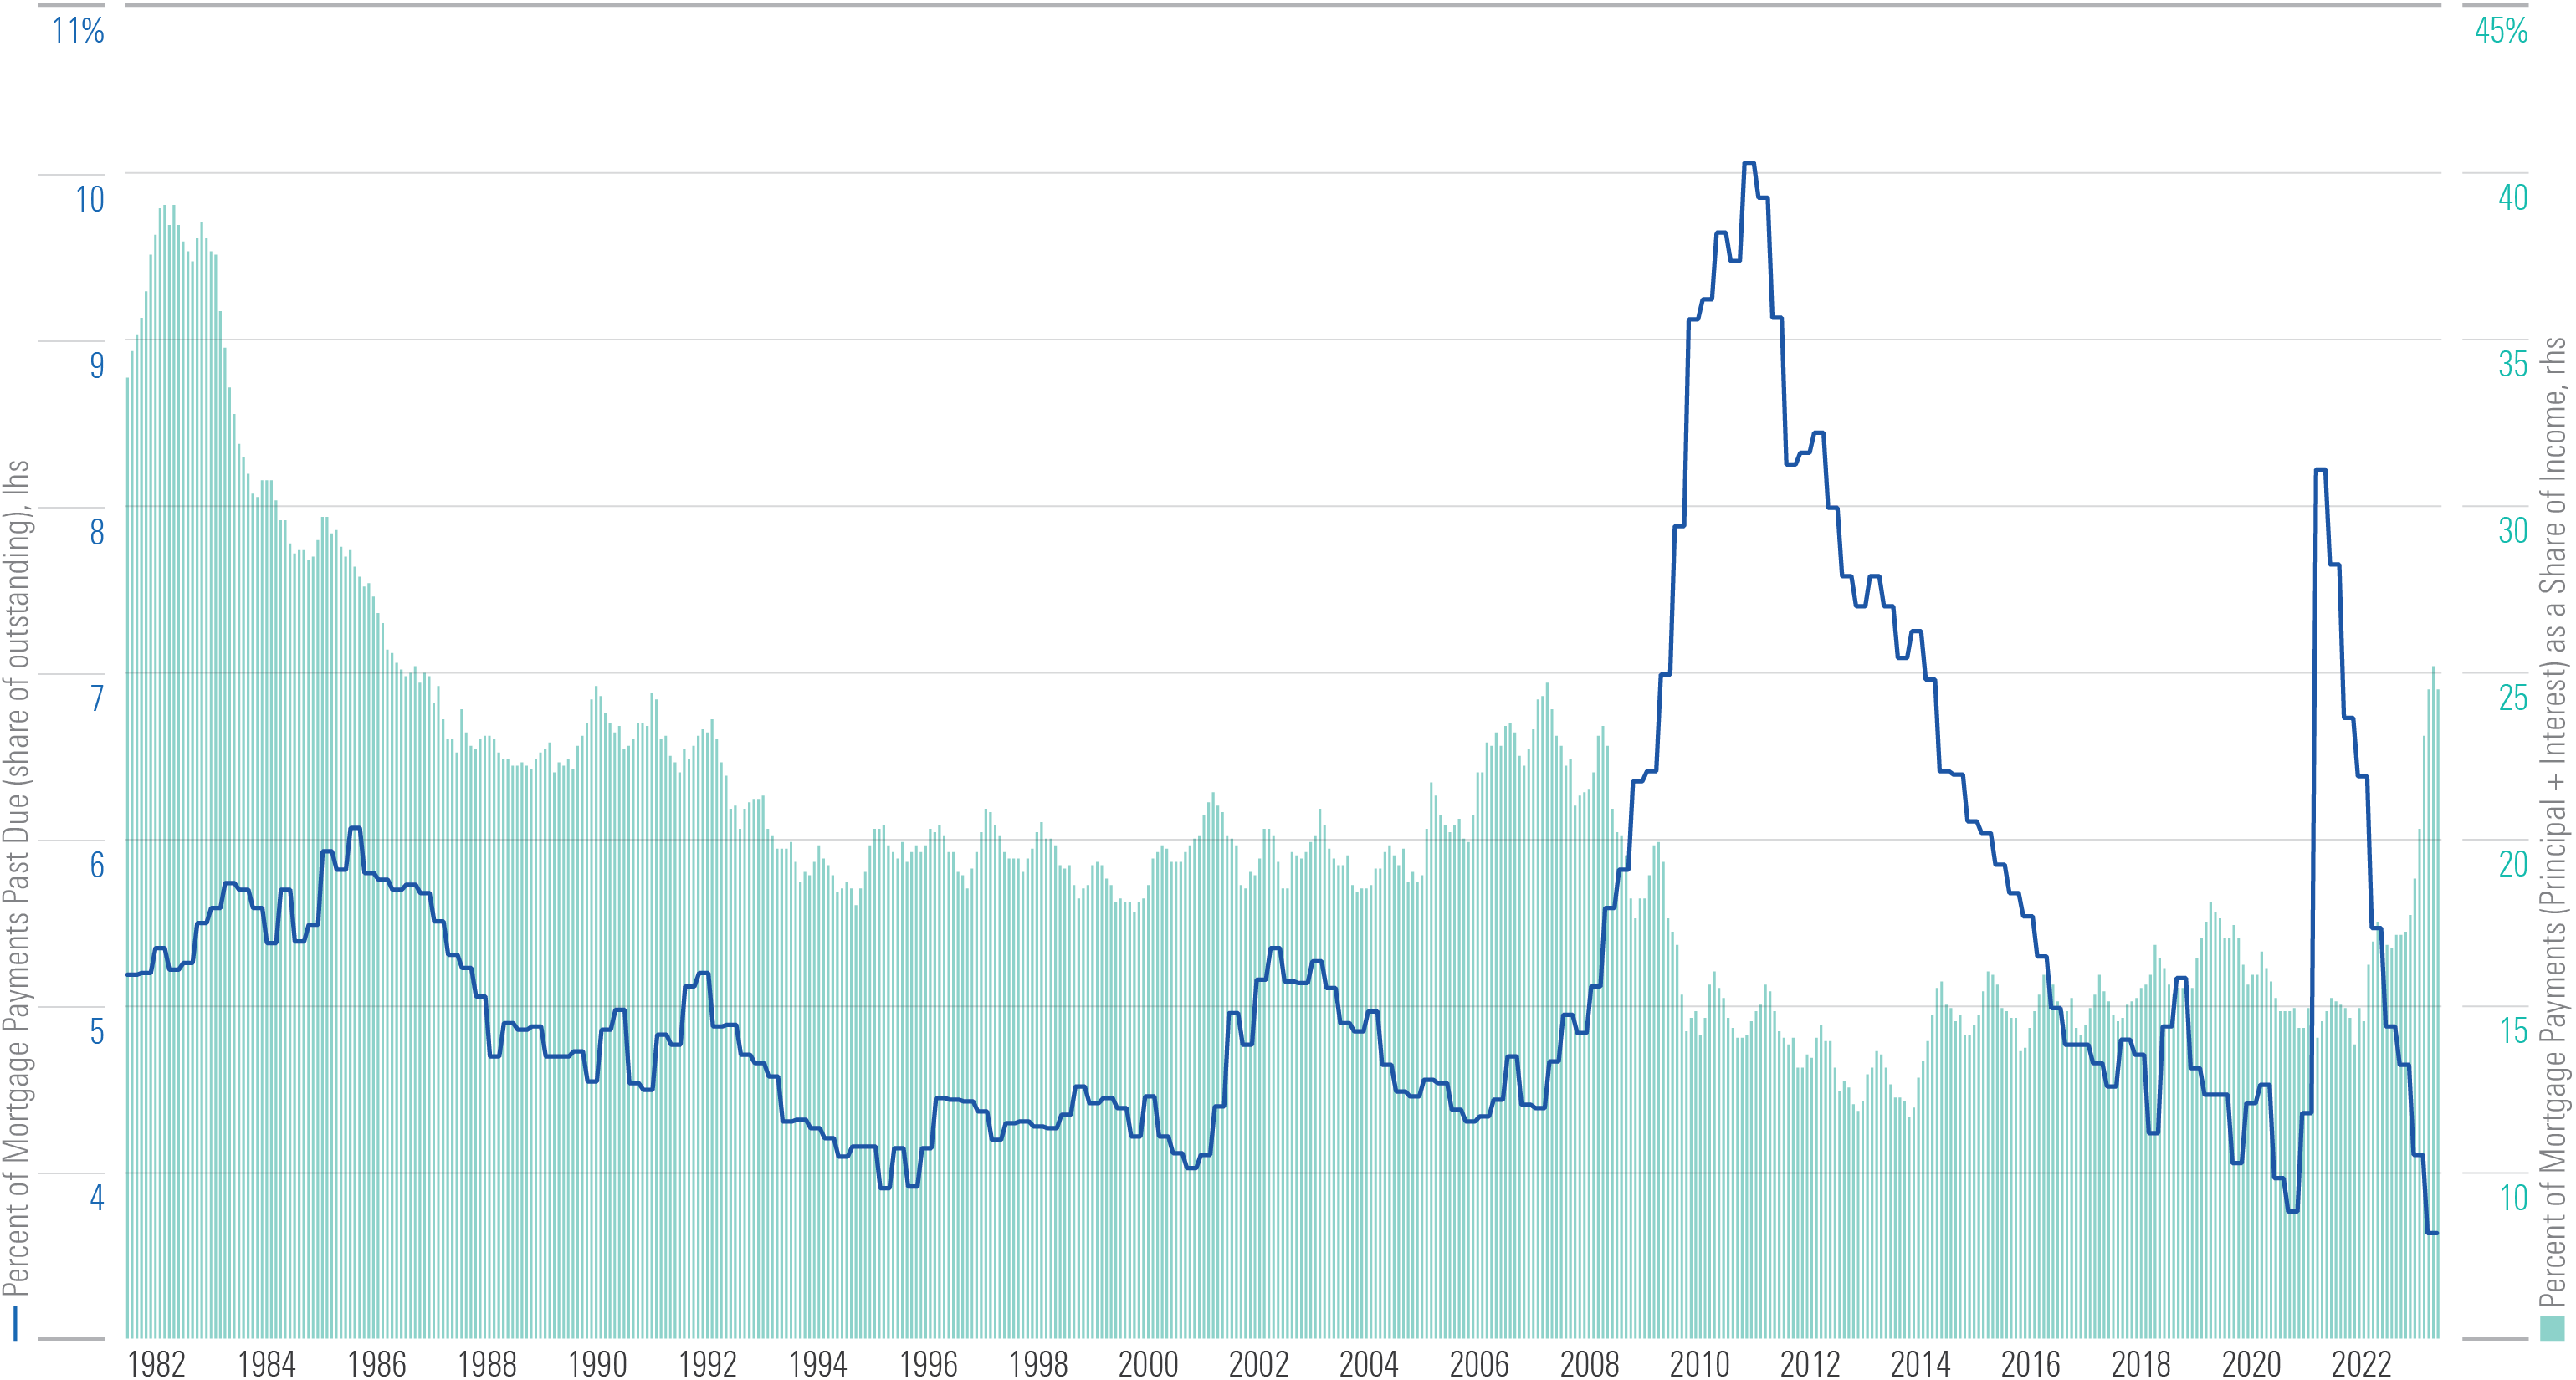 Line chart showing how the percentage of mortgage payments as a share of income has varied over the past 40 years.